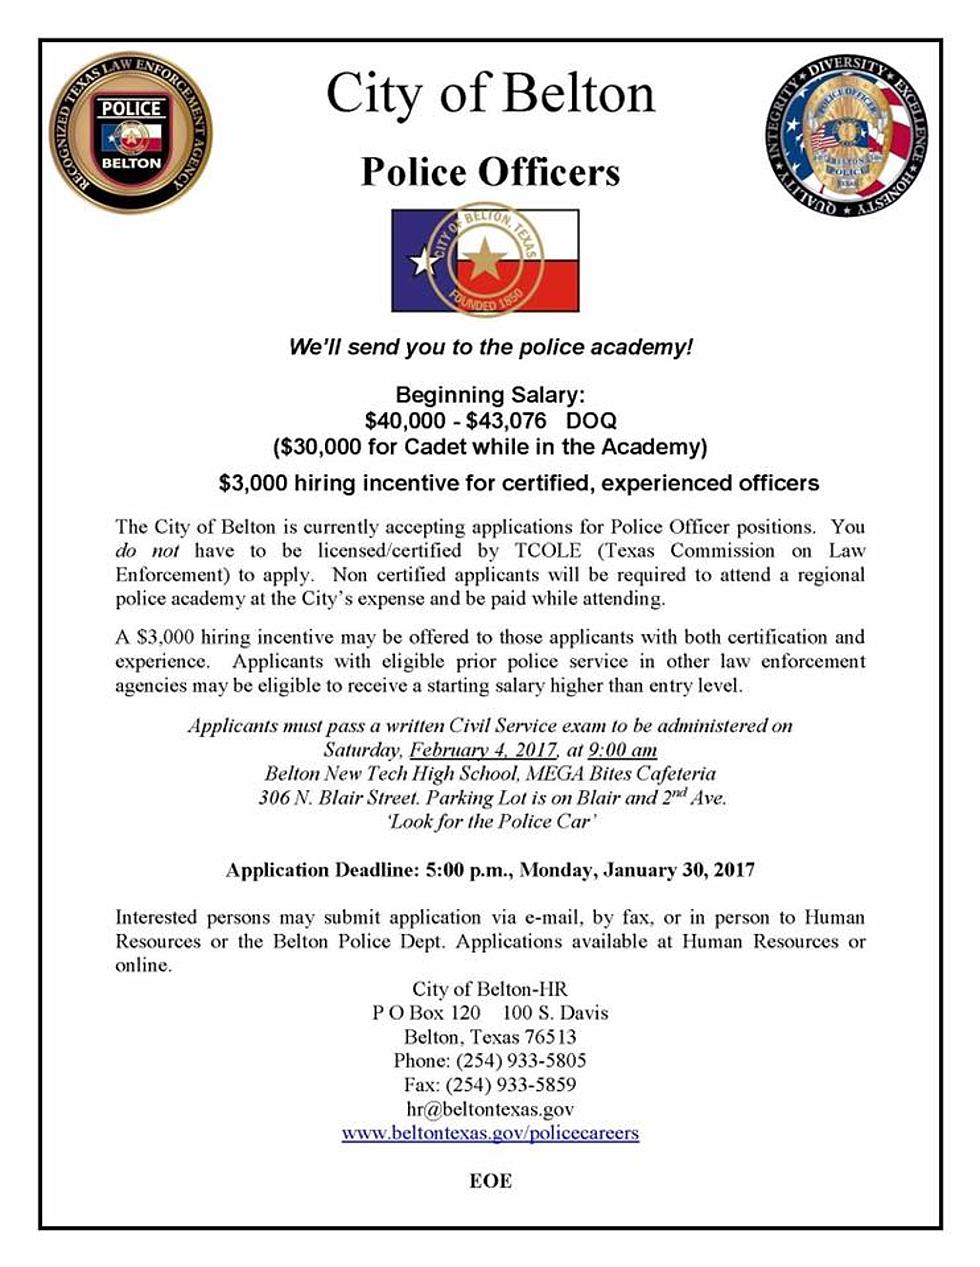 Belton Police Department Is Hiring, Offering Incentives